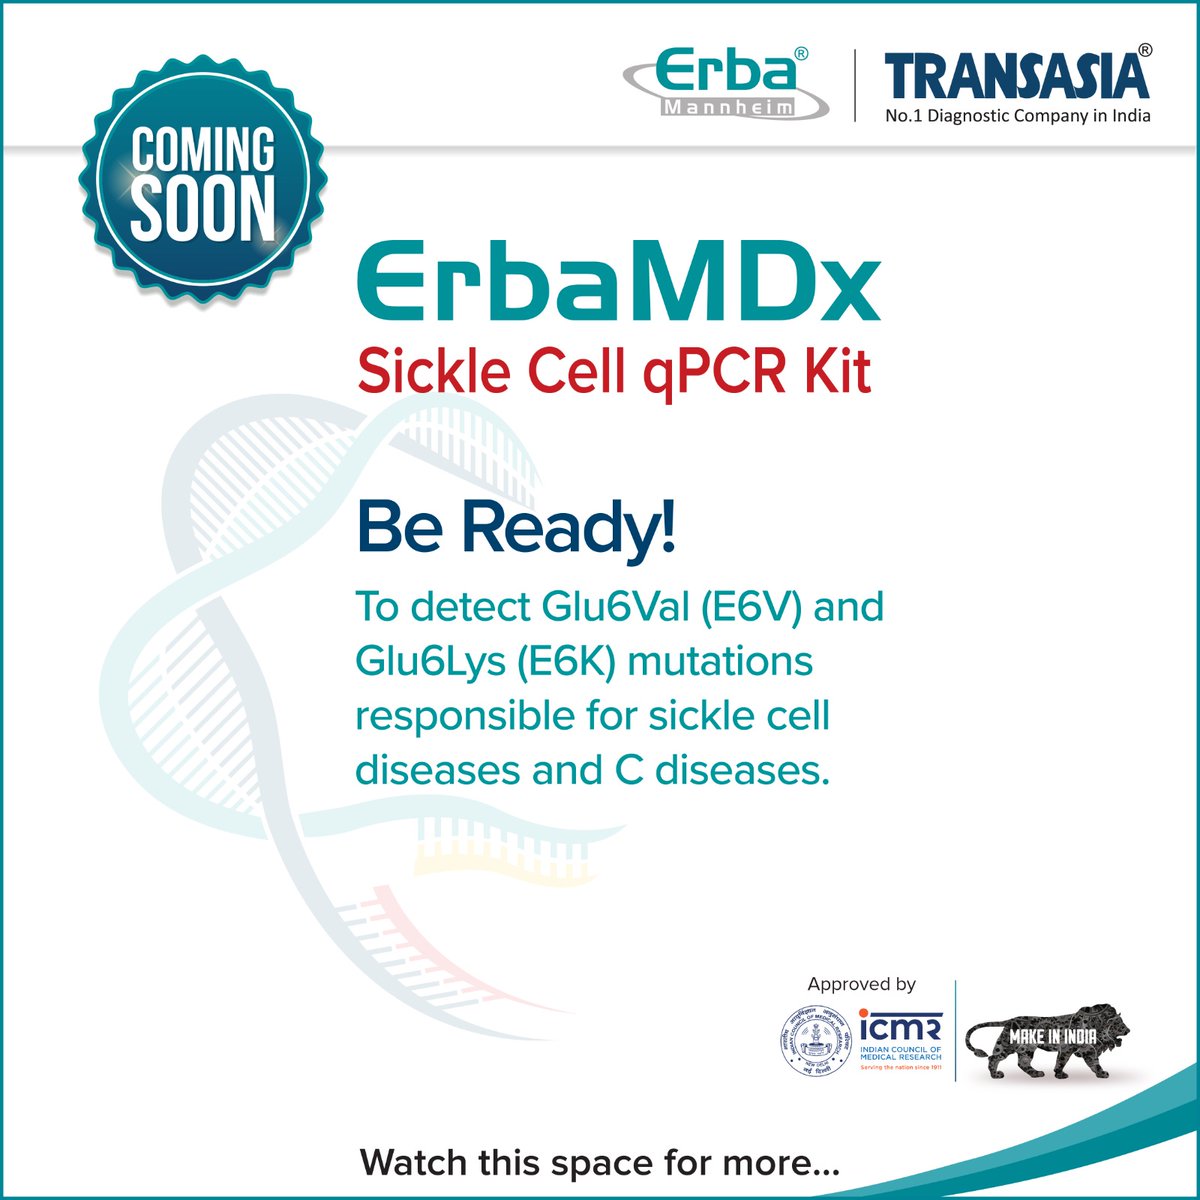 Detect sickle cell anemia with ErbaMDx Sickle Cell qPCR kit. It amplifies HbA and HbS alleles for Glu6Val mutation in HBB gene, with RNaseP as internal control to prevent false negatives. #sicklecellanemia #MadeinIndia #AtmaNirbharBharat #moleculardiagnostics #IVD #PCR